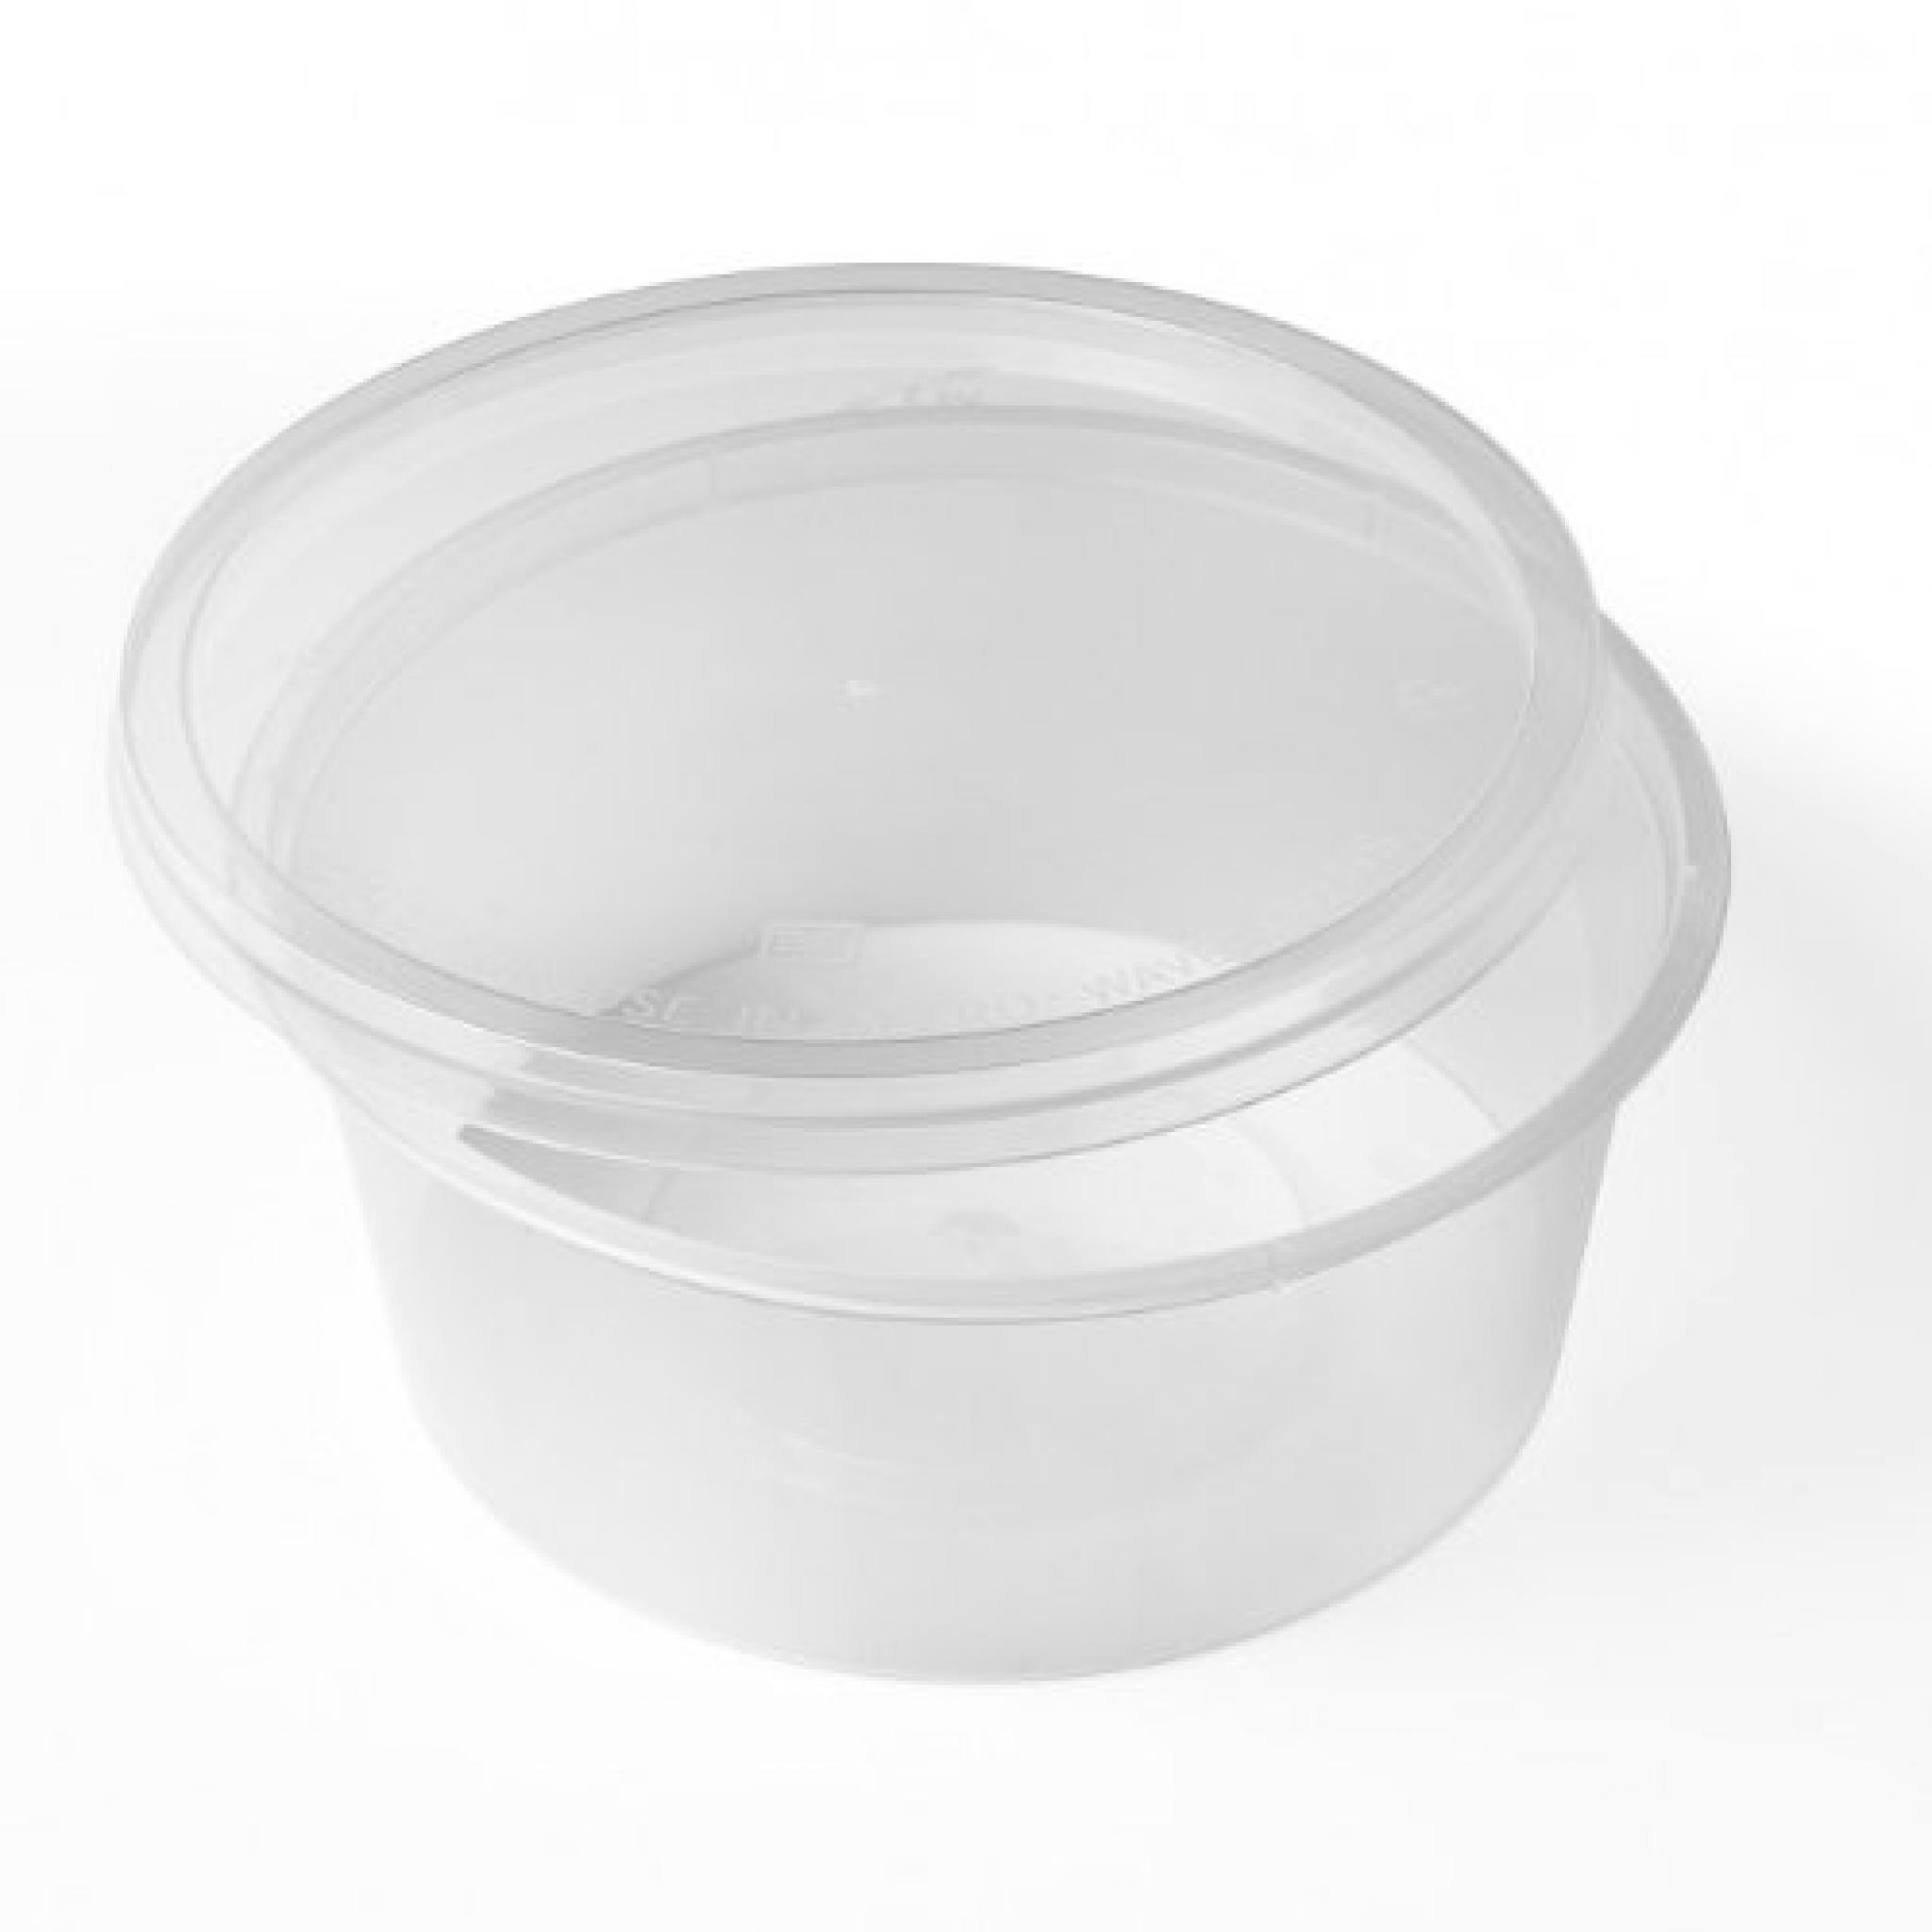 Round 10oz Microwave Clear Plastic Food Containers